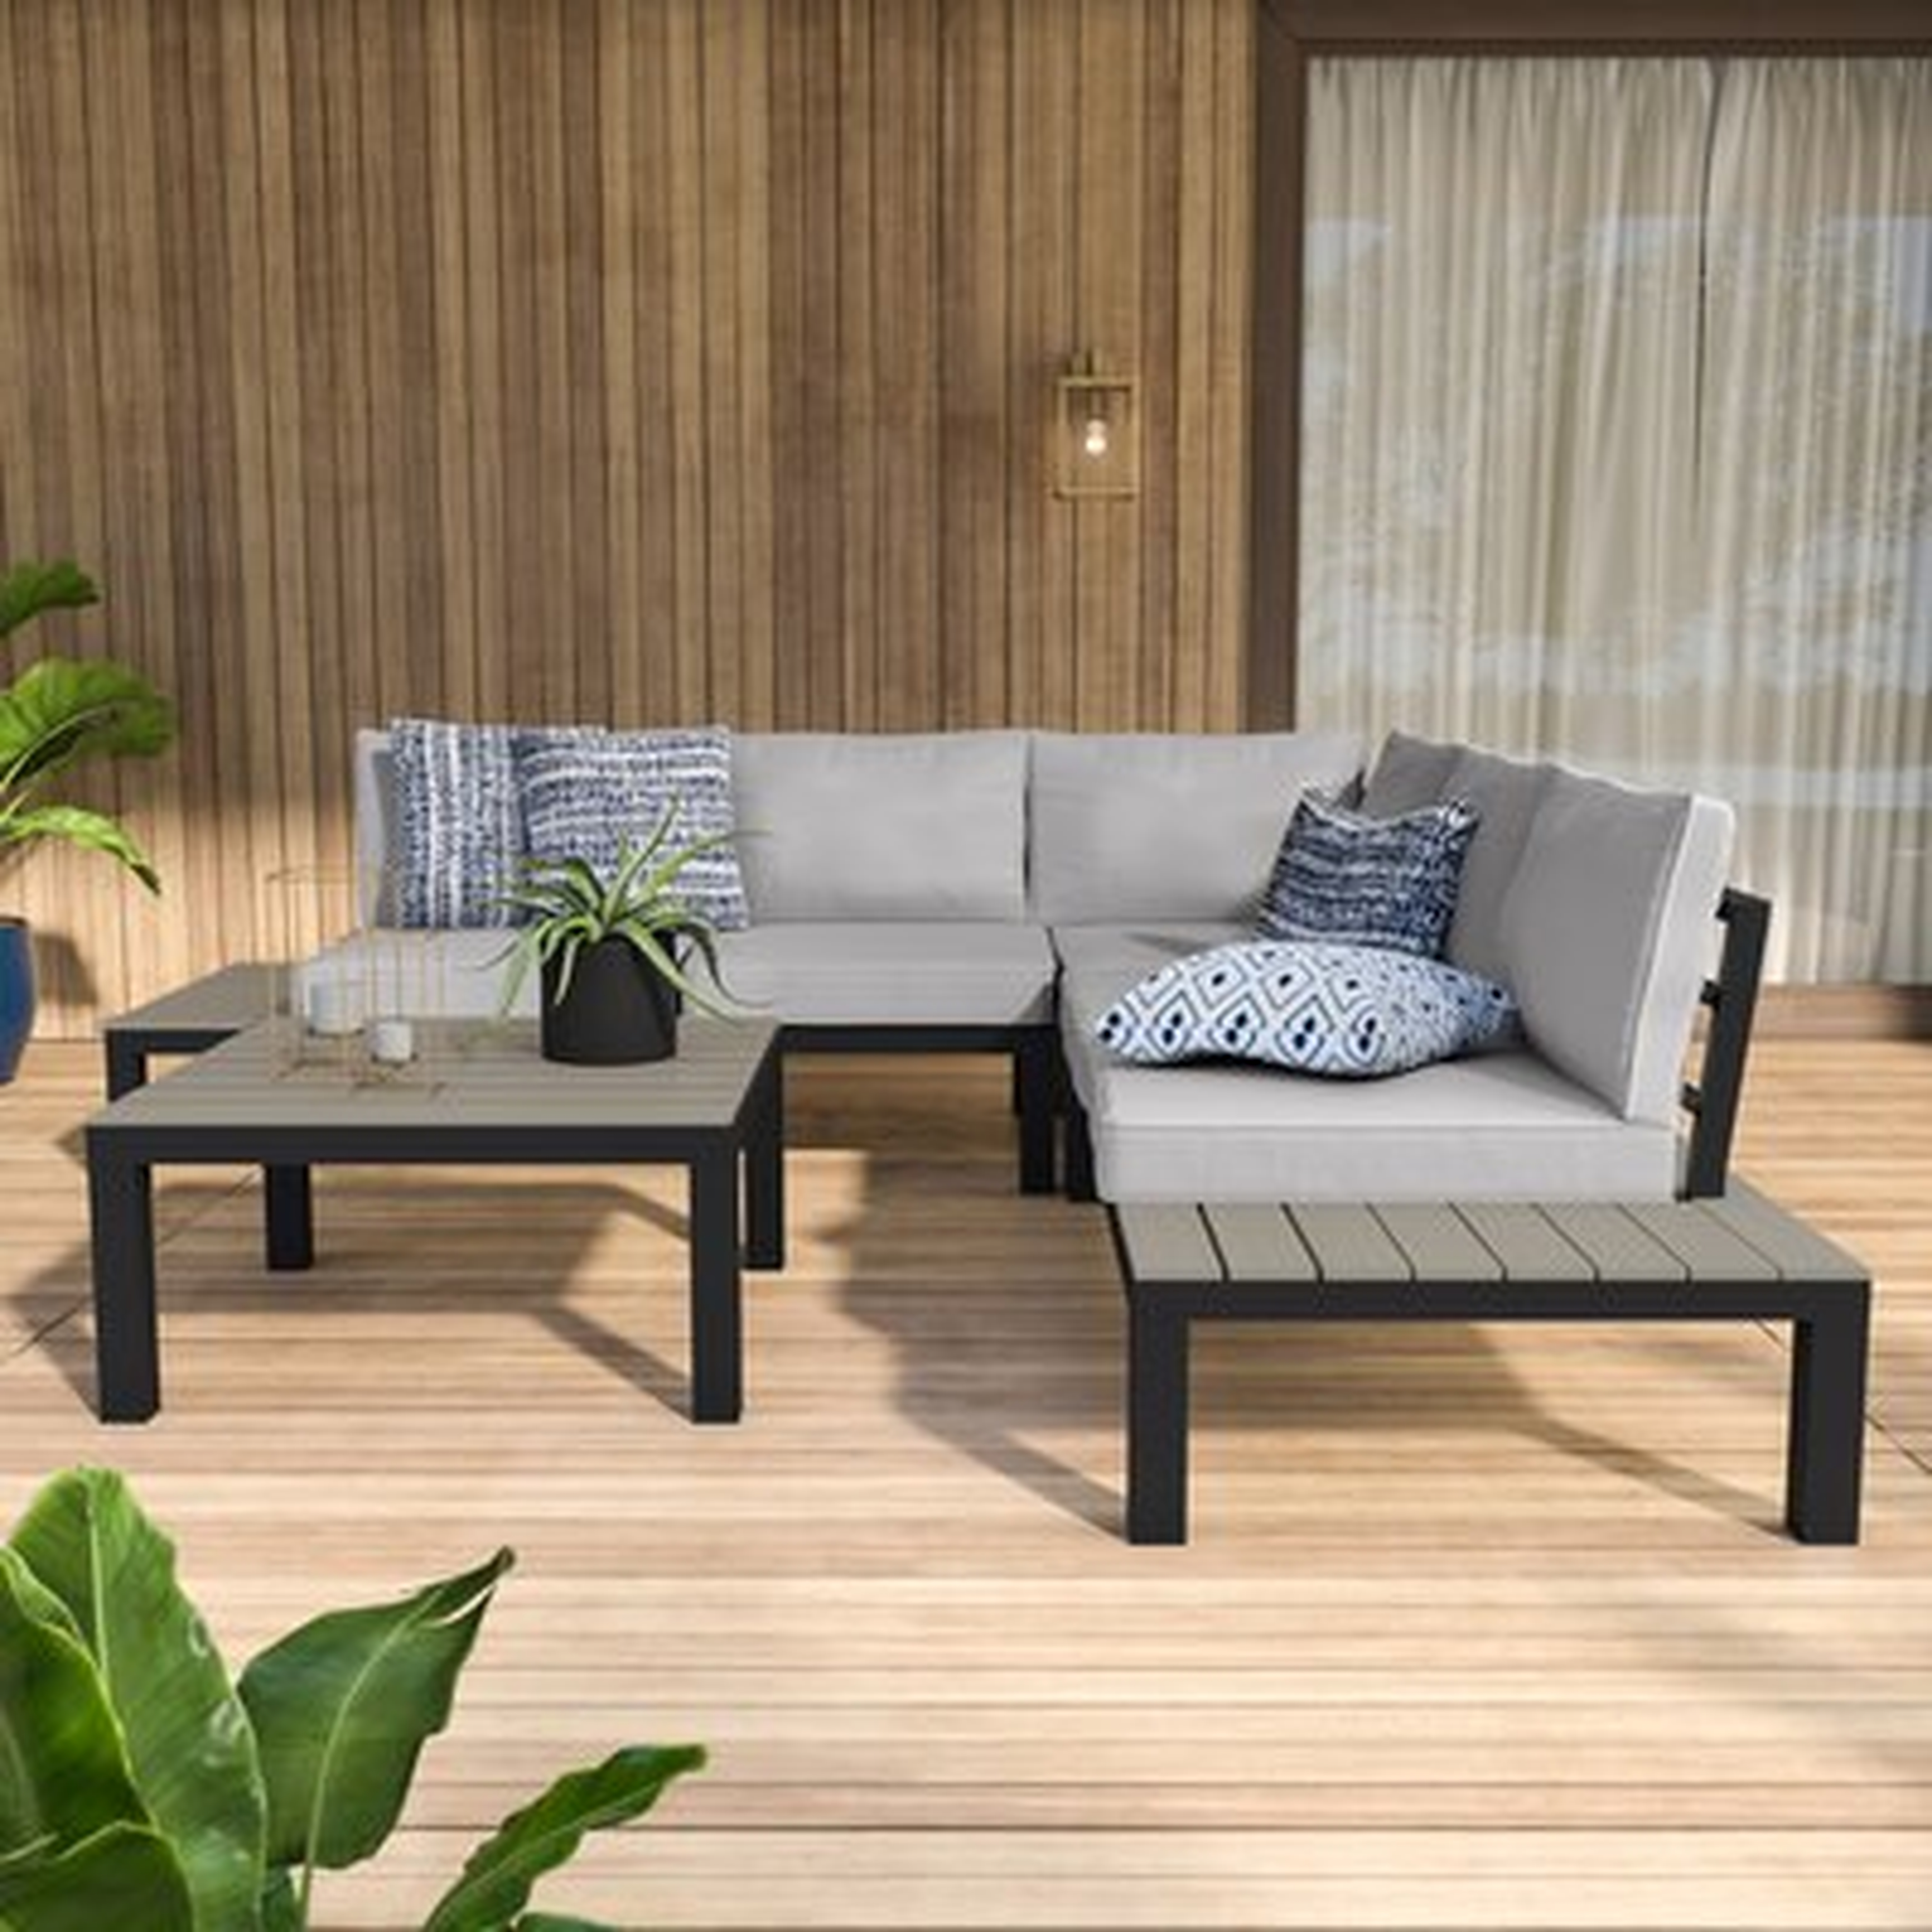 Claunch 4 Piece Sectional Seating Group with Cushions - Wayfair